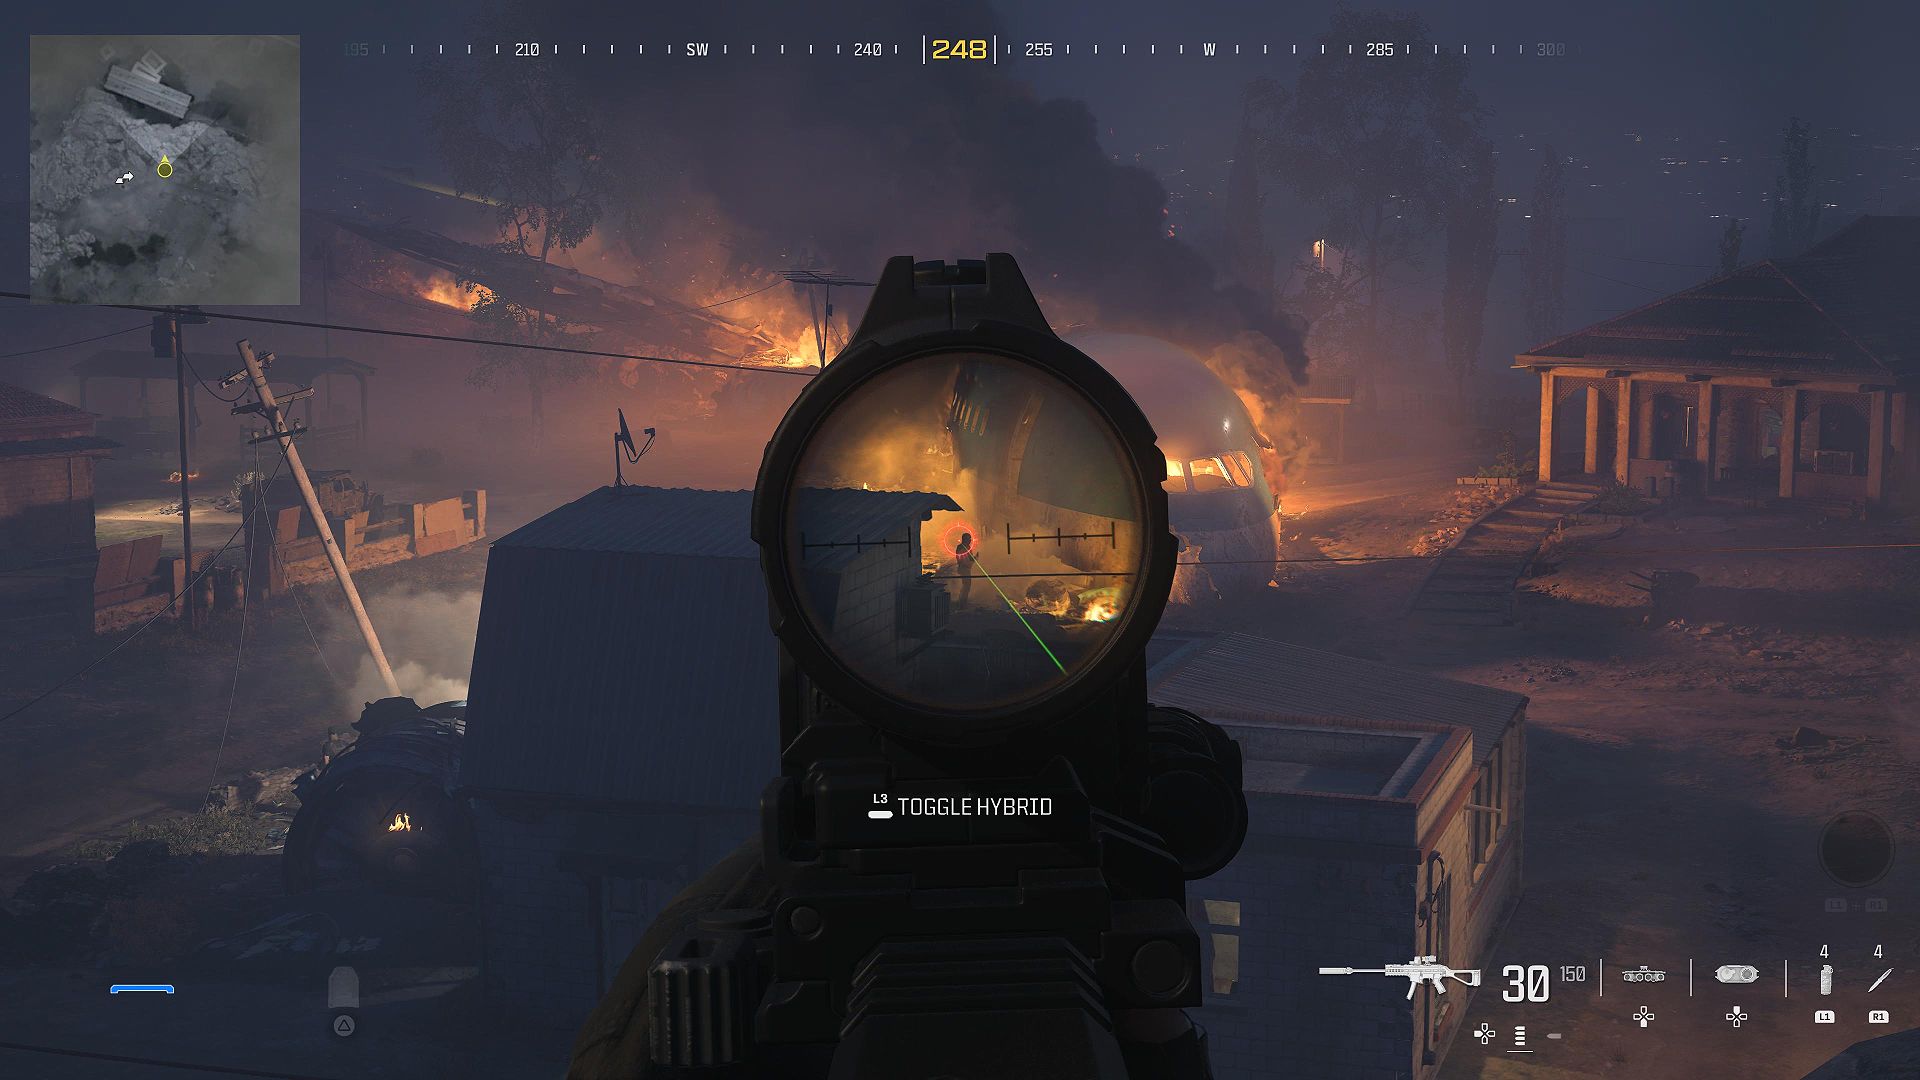 The player aiming down sights at an enemy in MW3